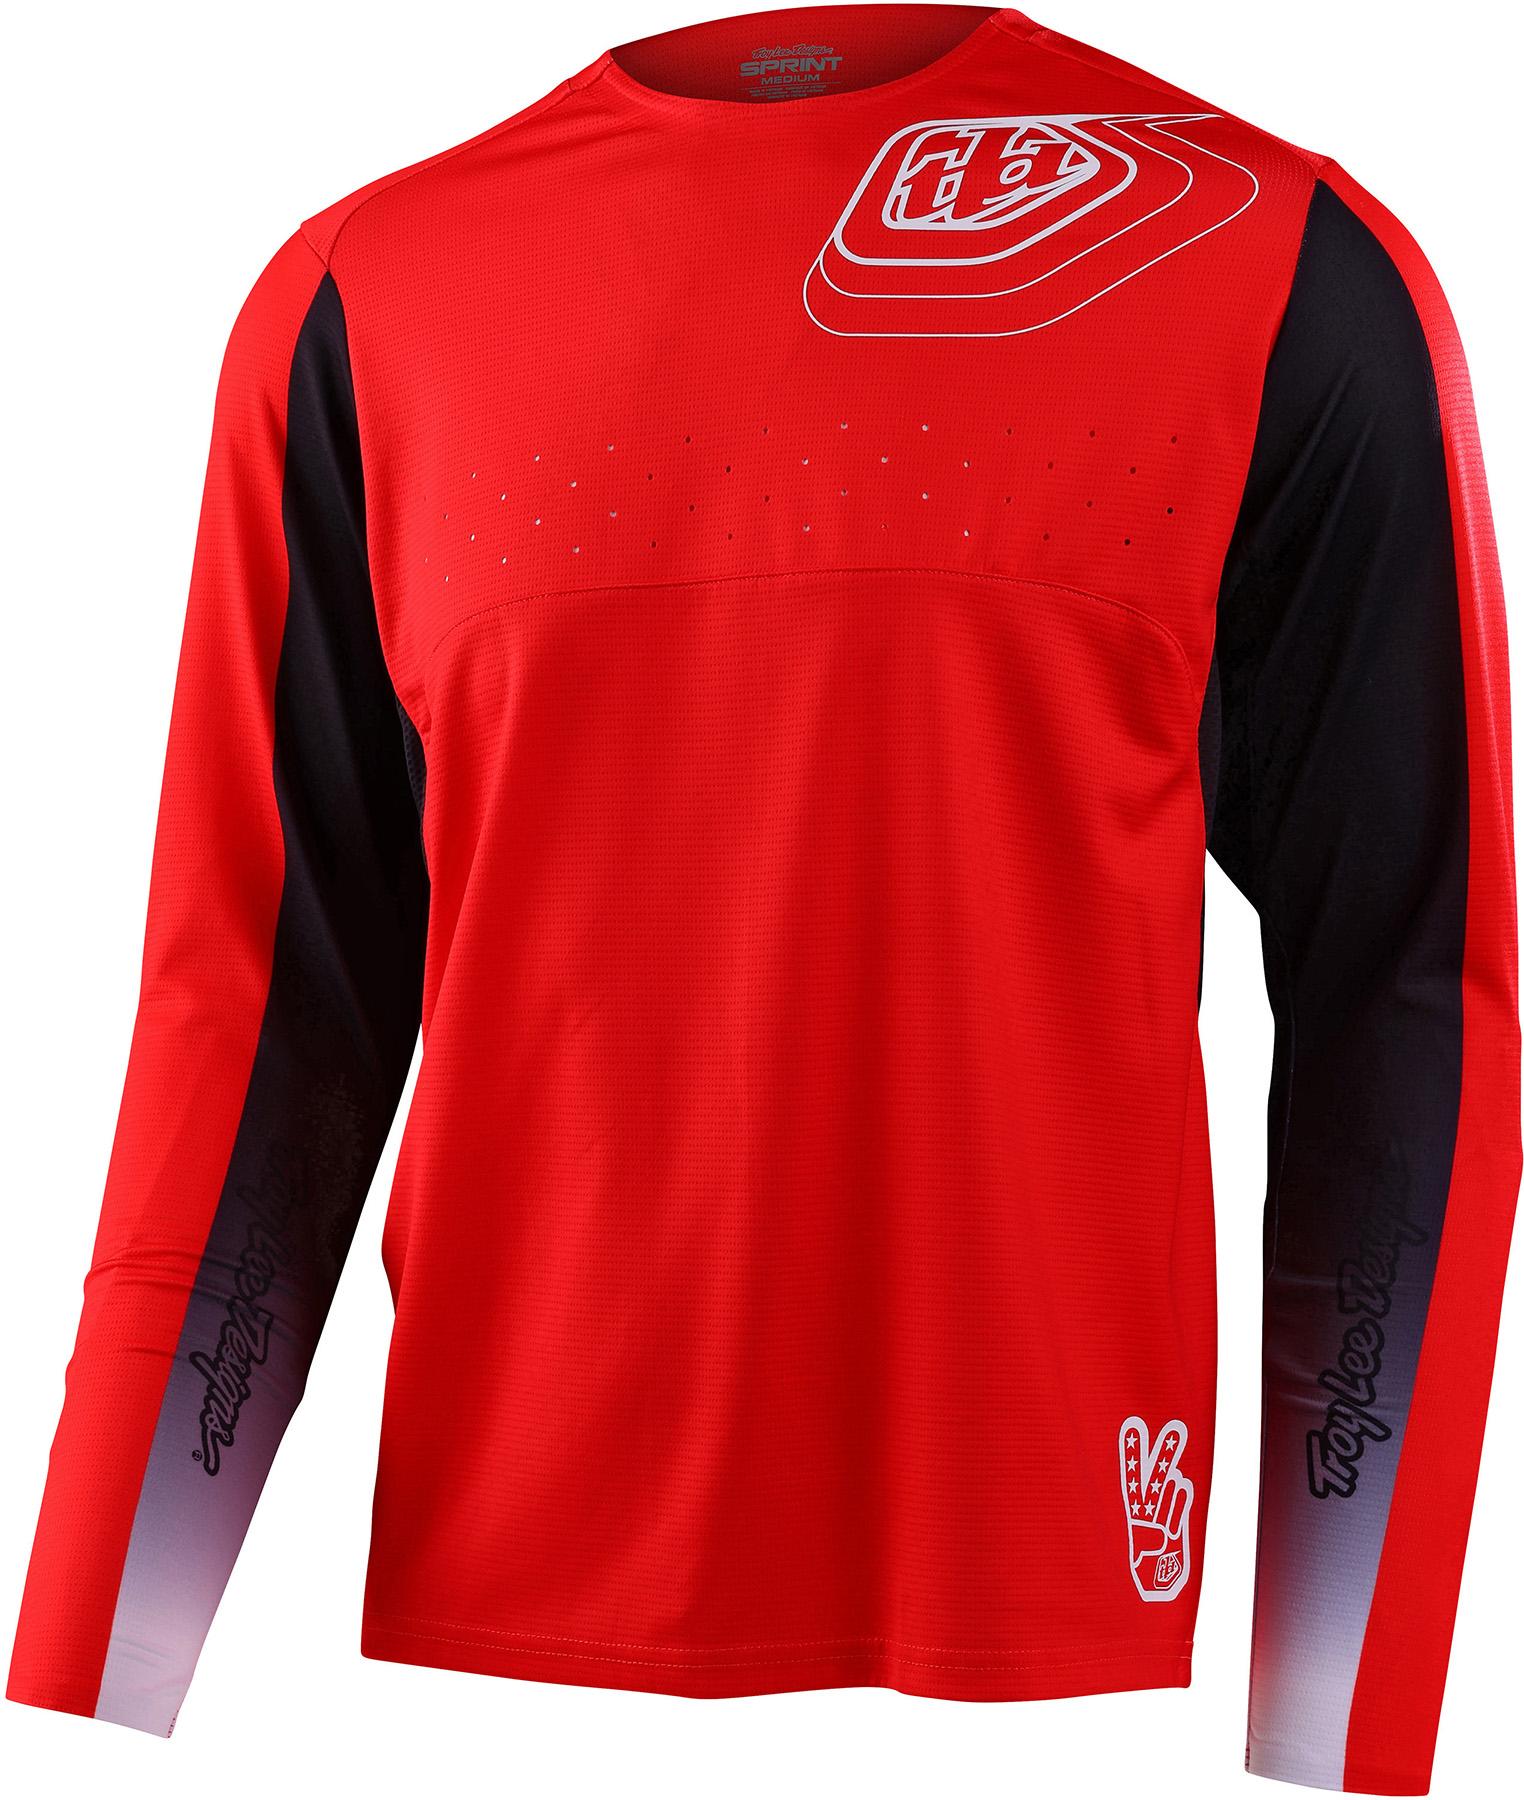 Troy Lee Designs Sprint Ritcher Cycling Jersey - Race Red